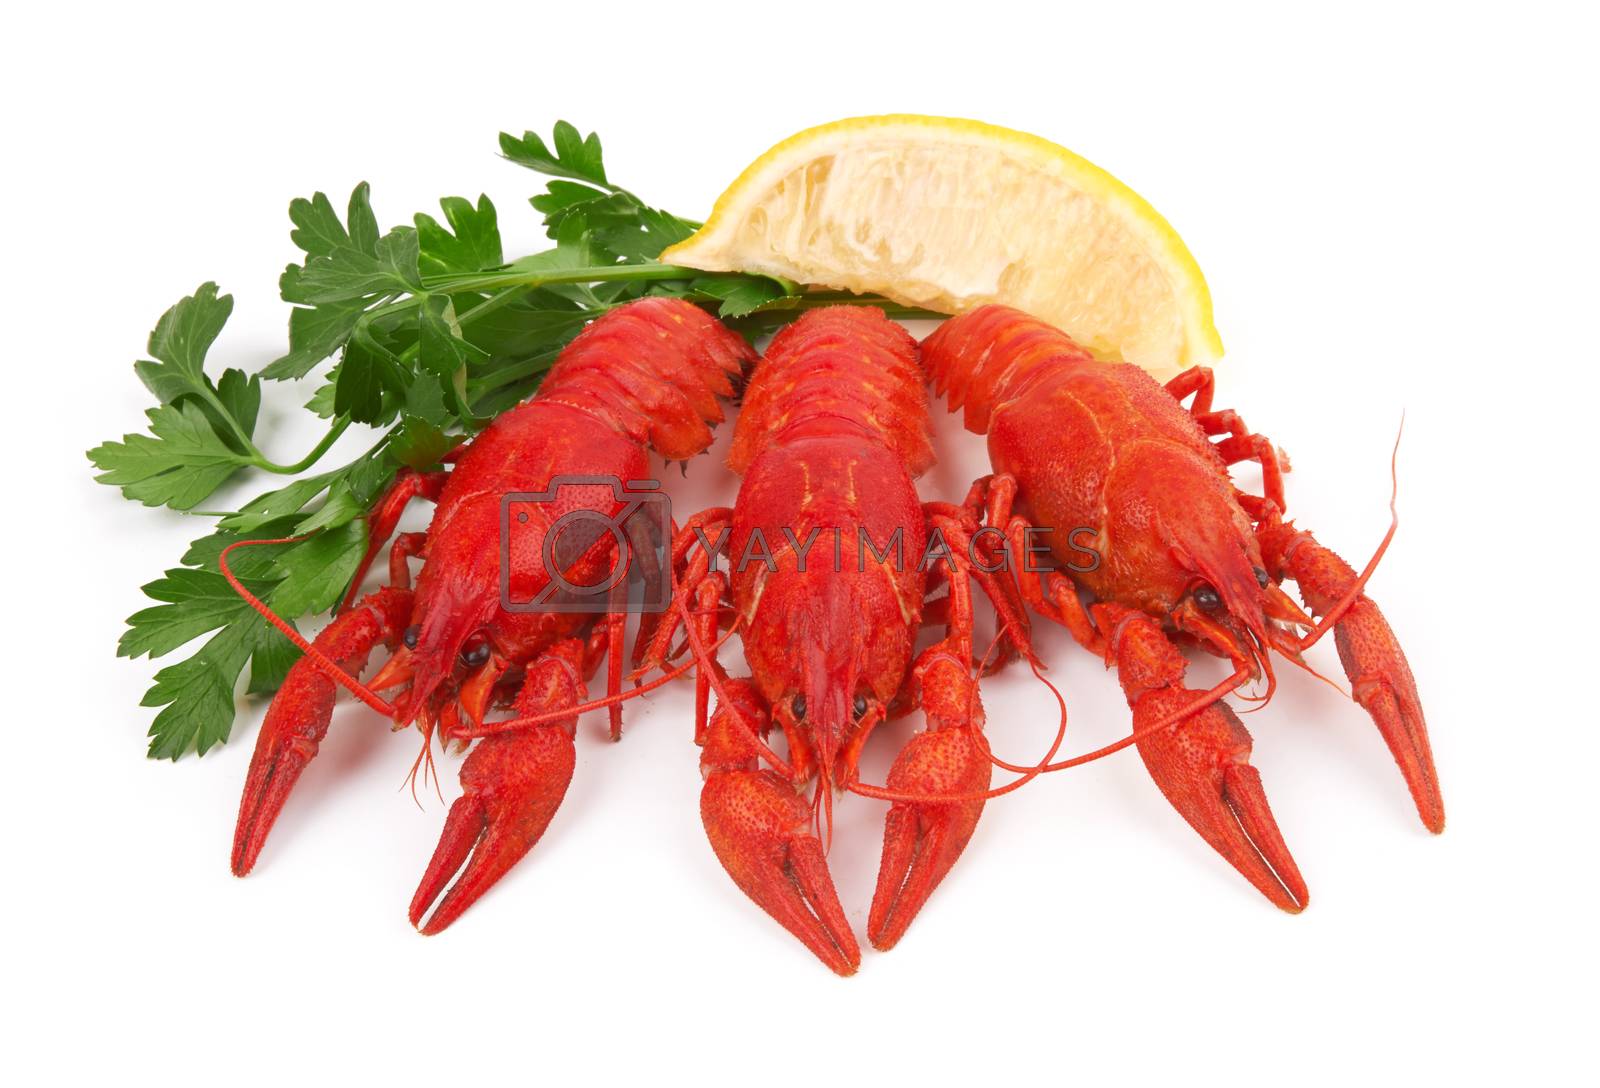 Royalty free image of crayfish by pioneer111